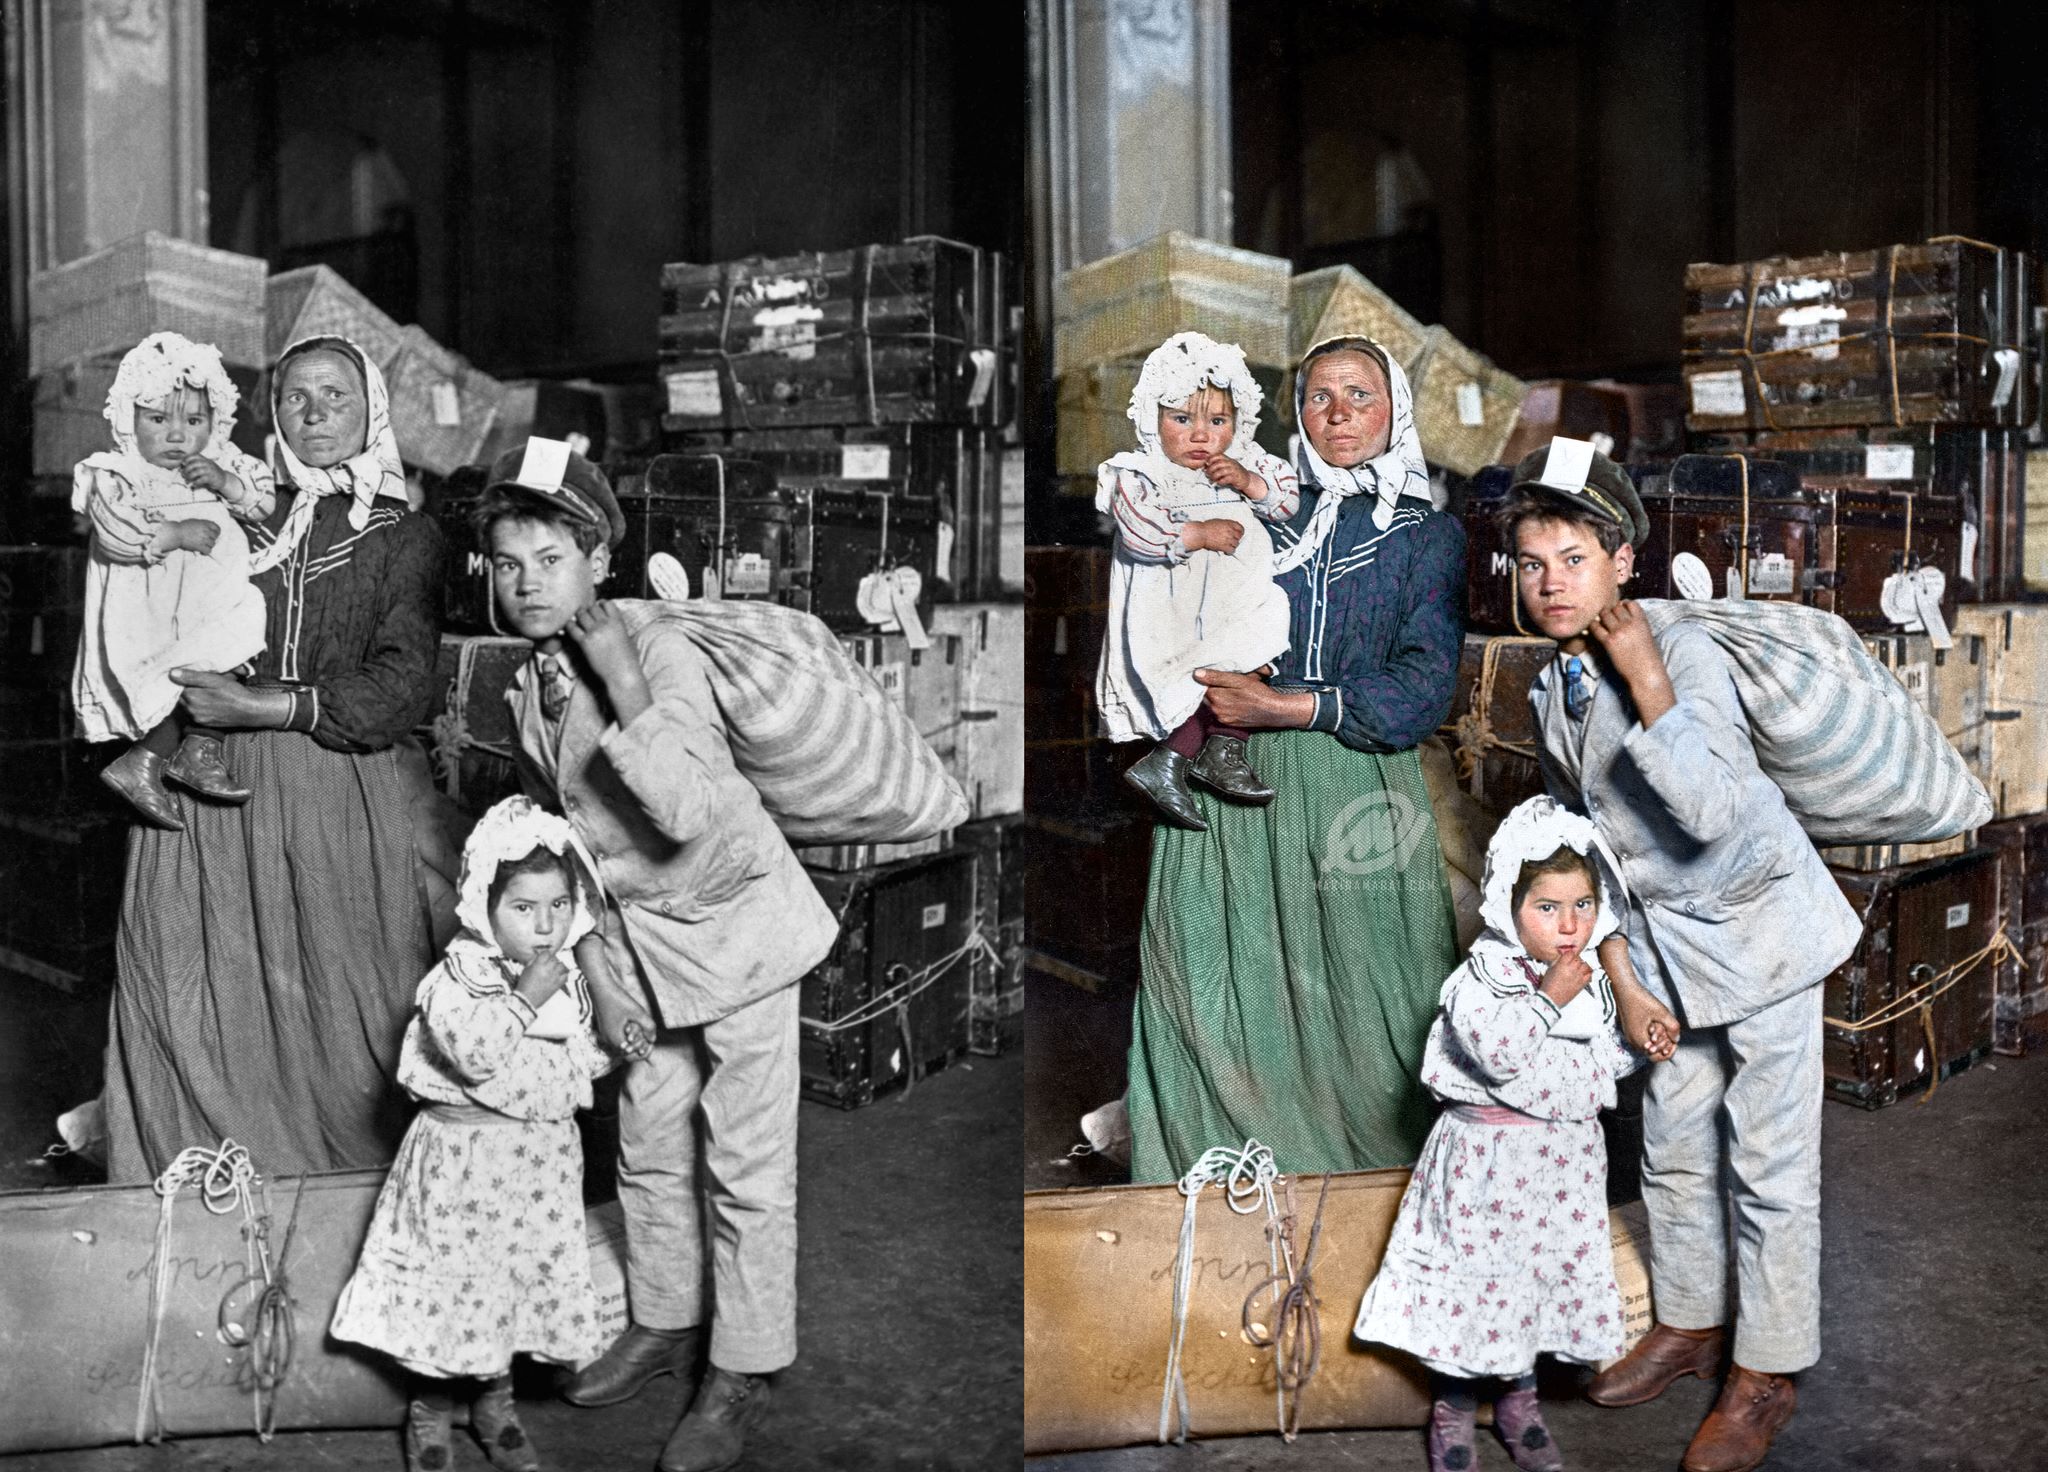 Colorizing Black and White Photos: The Simple Method